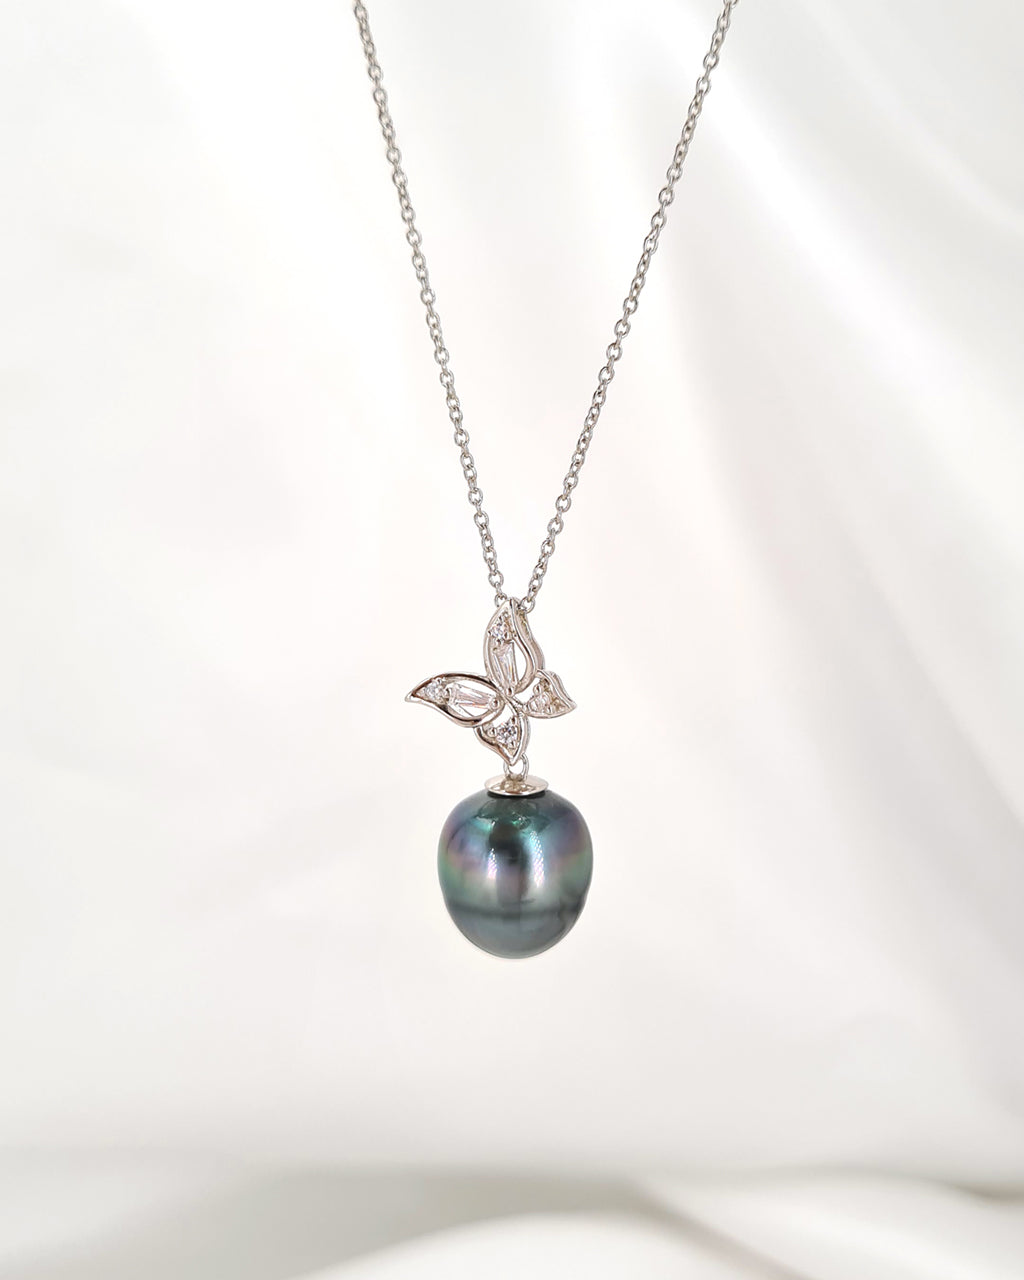 11mm+ Tahitian Pearl Pendant Necklace - Butterfly Pendant 